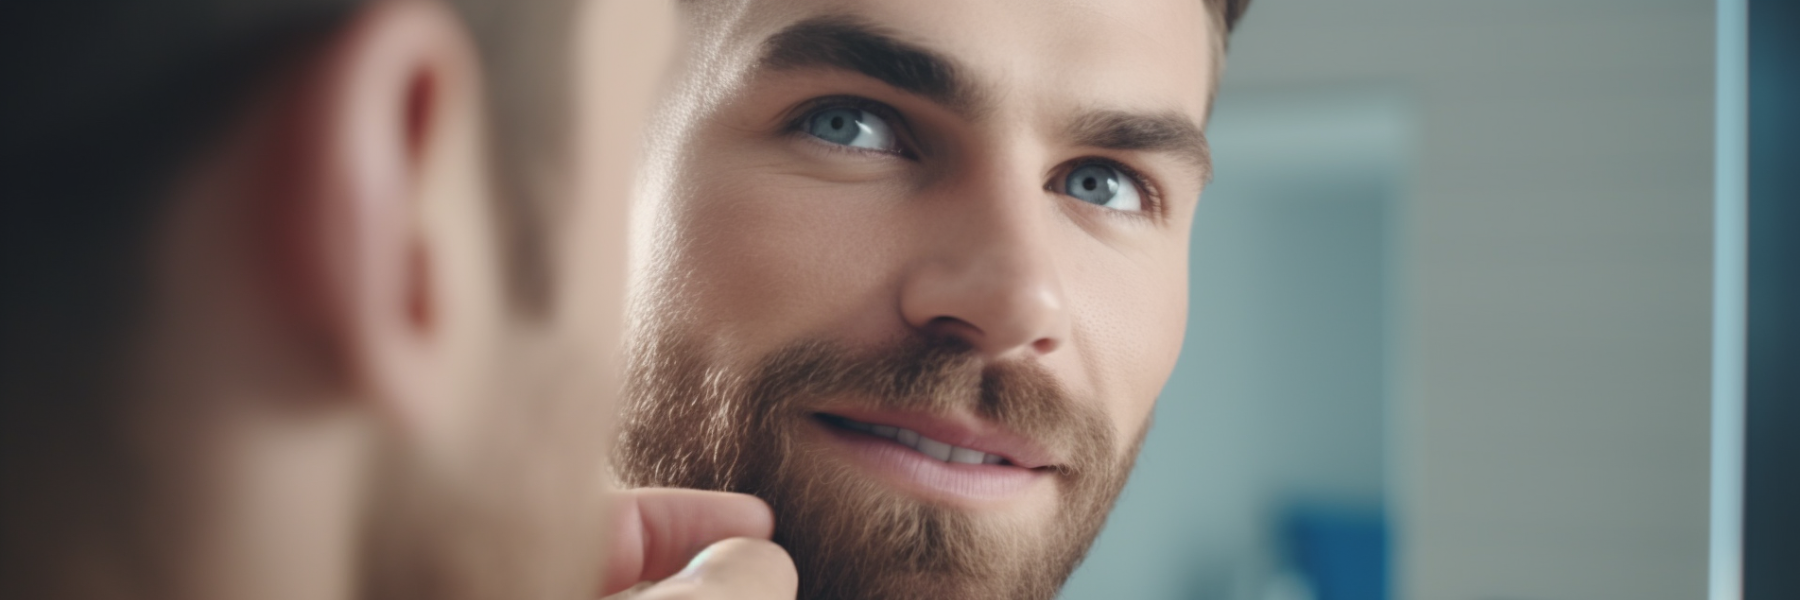 A Step-by-Step Guide to Applying Men's Eye Cream